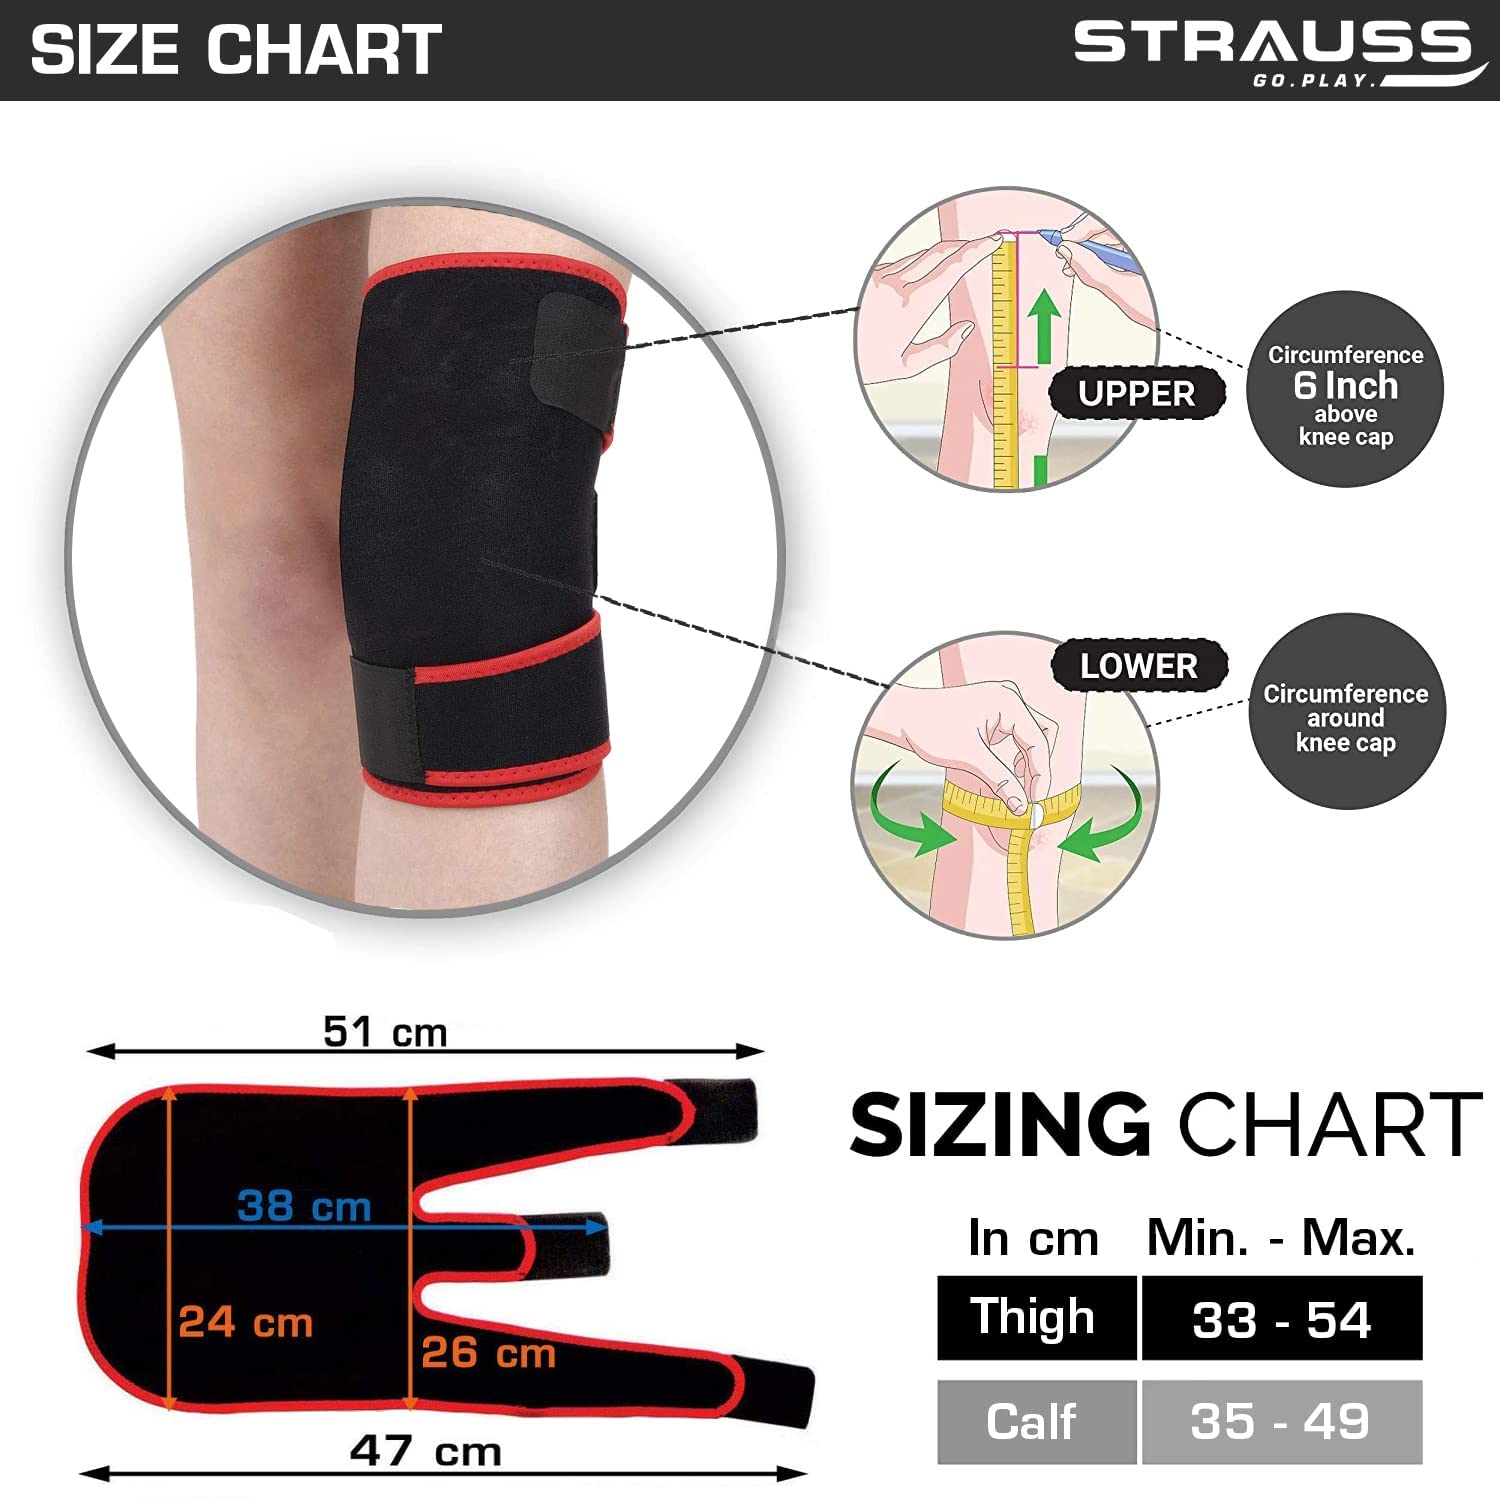 Strauss Adjustable Knee Support, Pair (Free Size, Black), (Pack of 2)